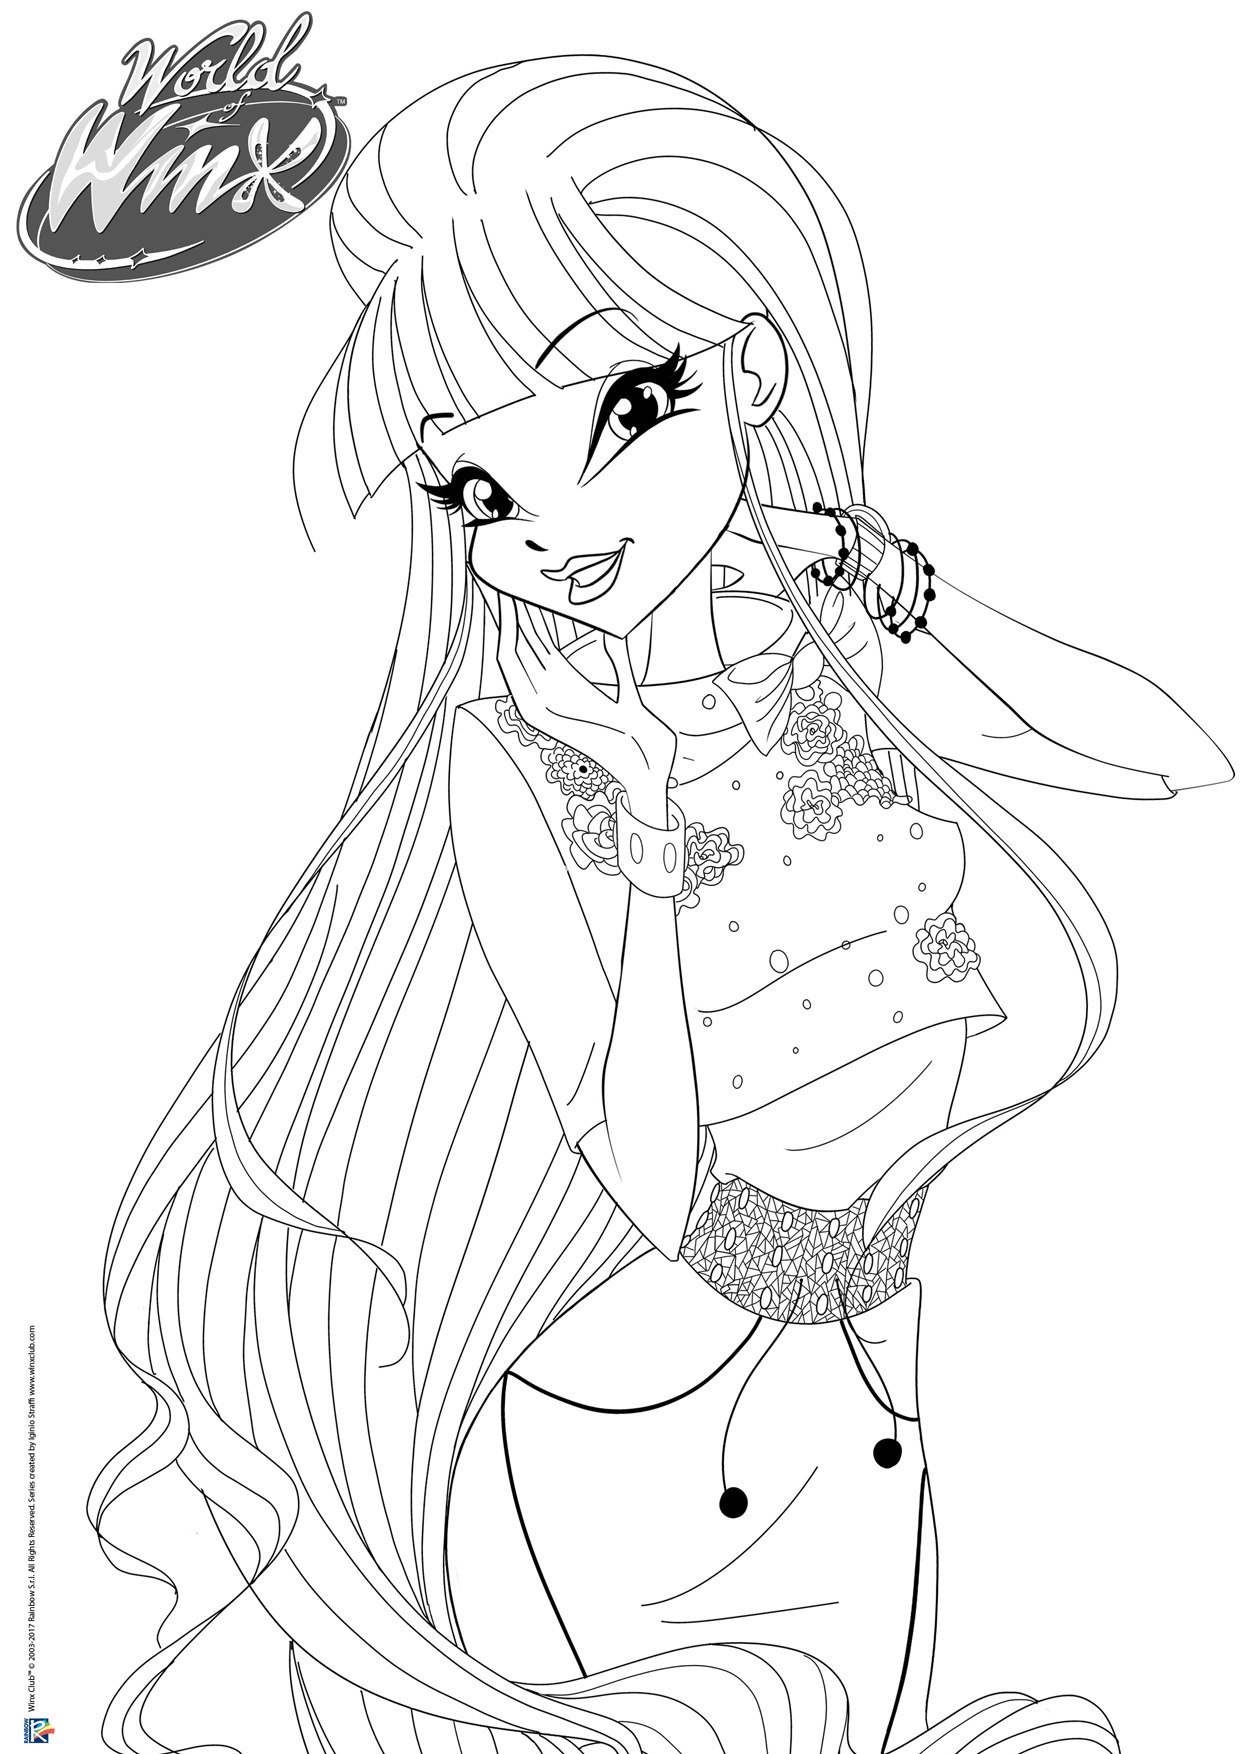 Coloring Pages : Welcome To World Of Winx Worldofwinxclub New Club ...